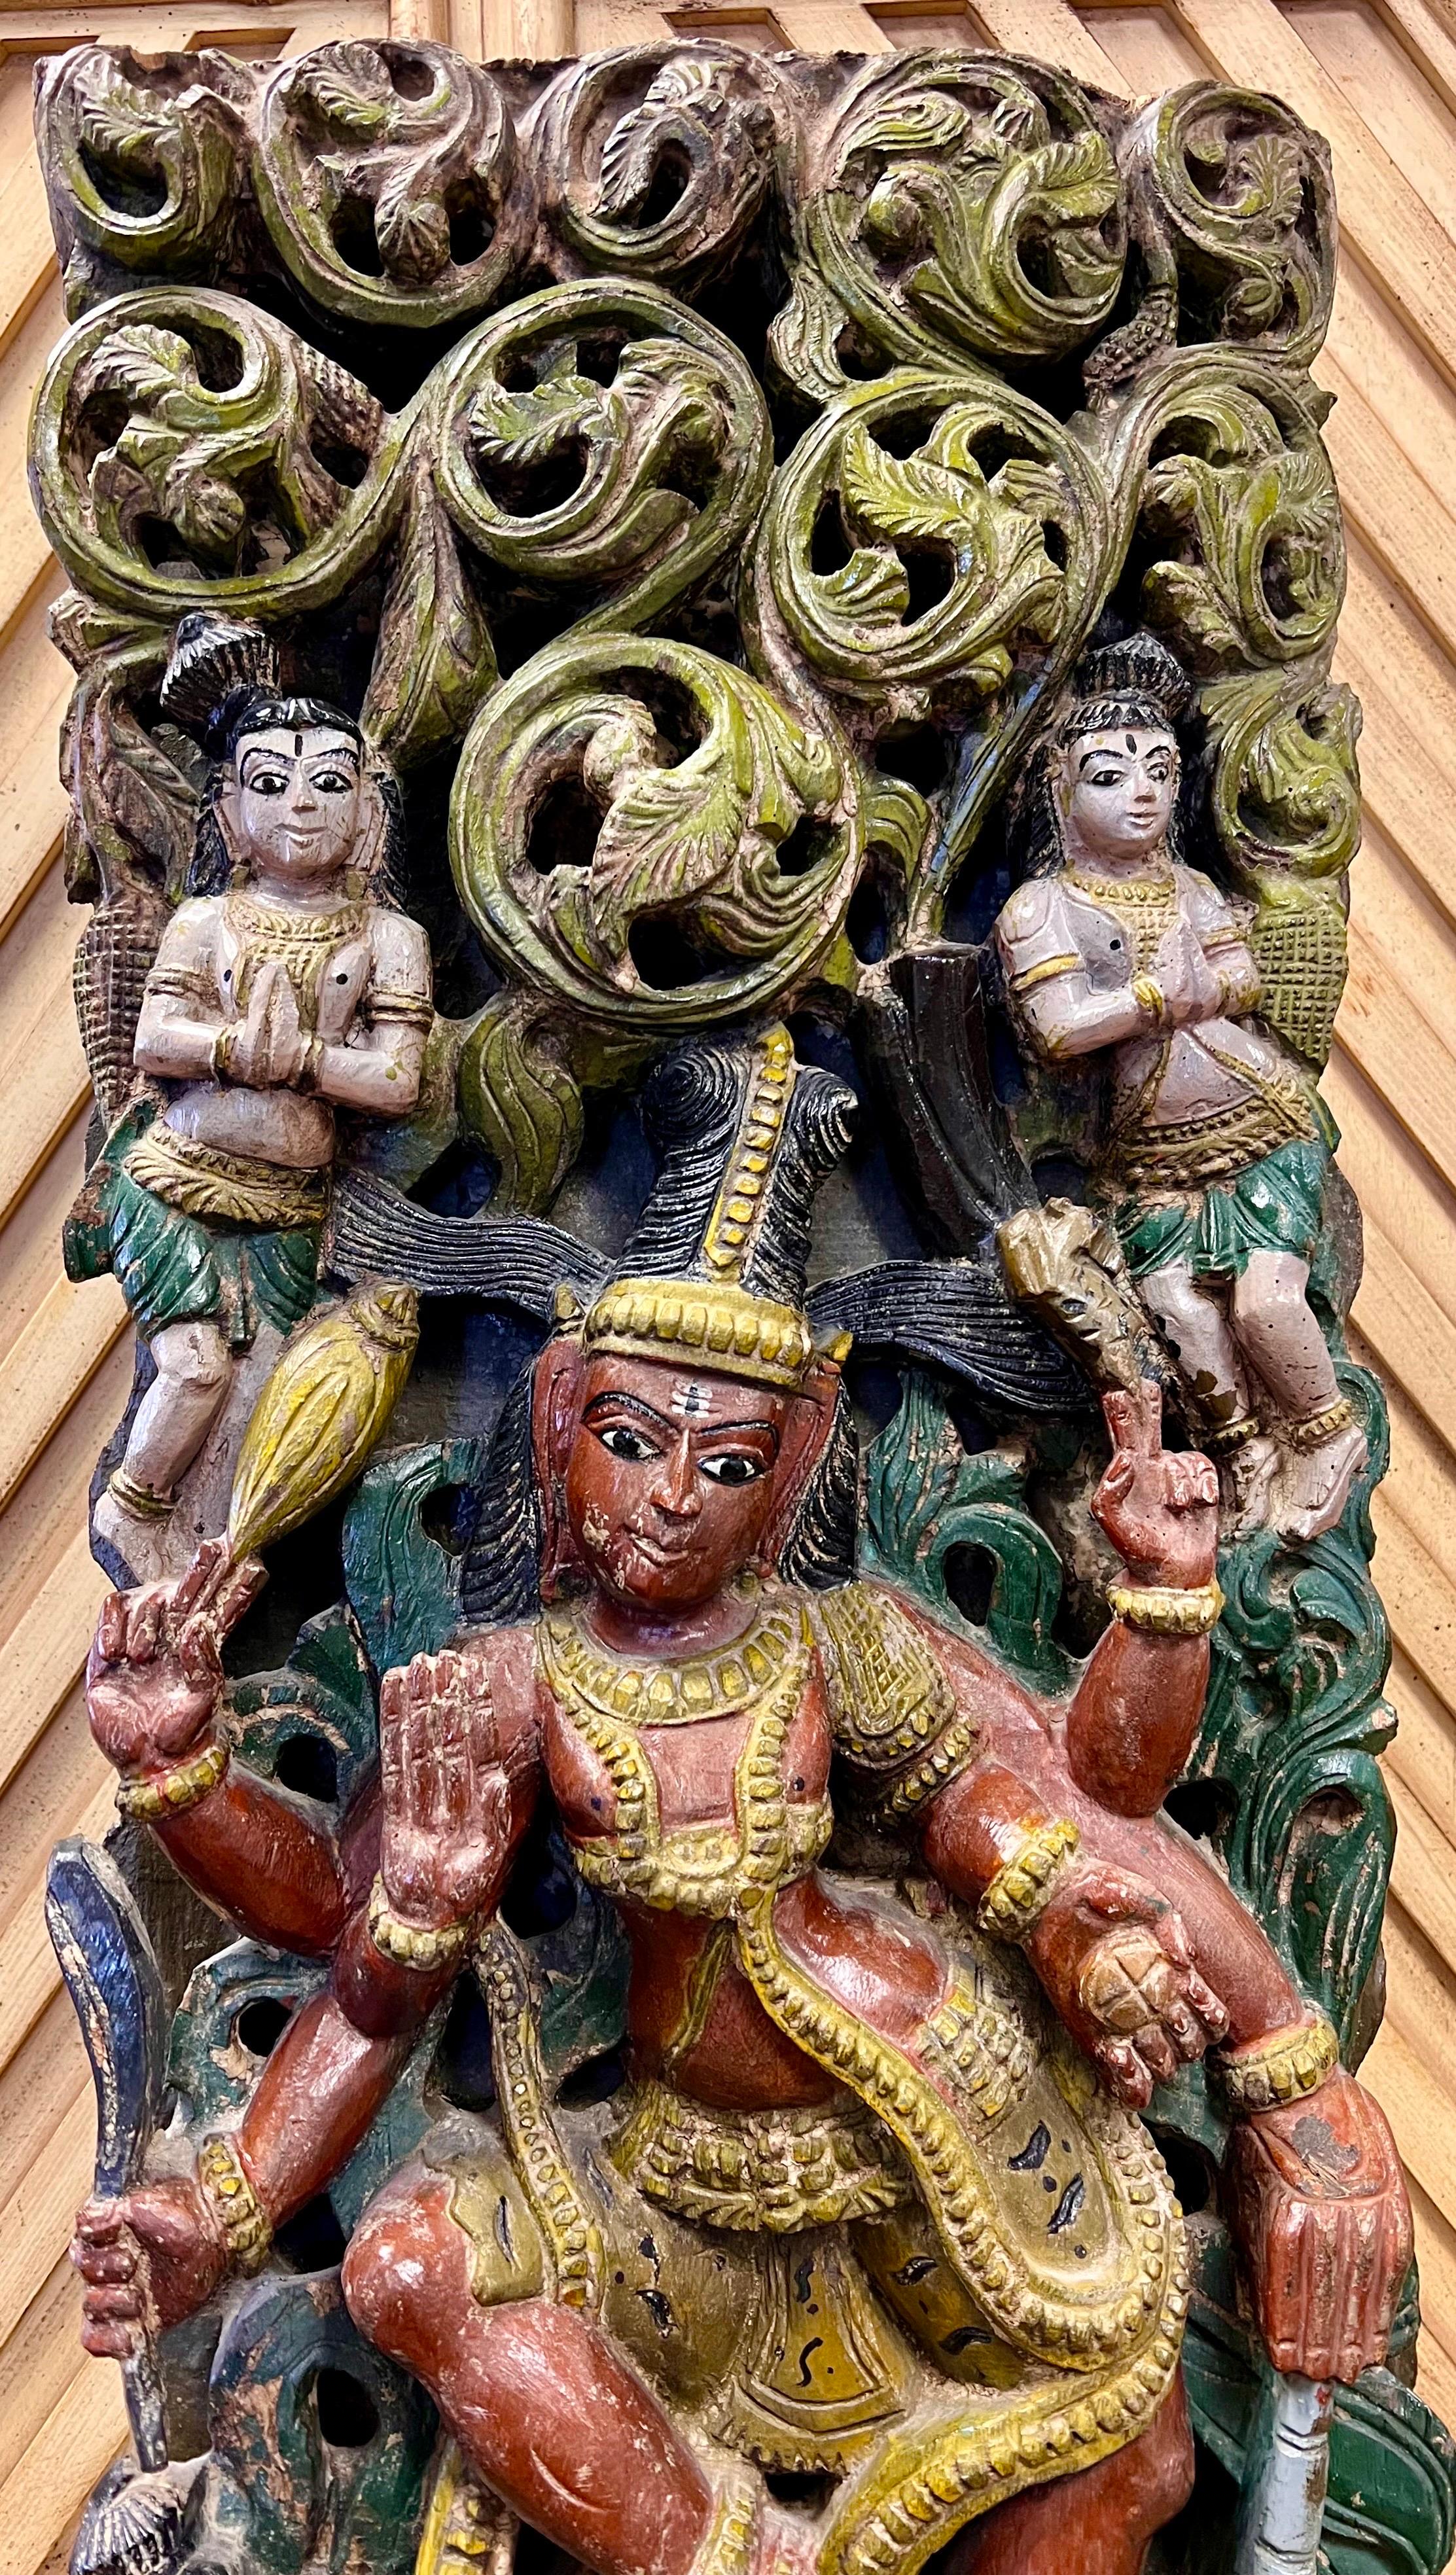 One of a kind antique carved wall sculpture. Weighs 35lbs is ready to hang with a height of 70 inches. The detail of the intricate carvings is next level. It features intricate carvings including three large multi-armed Hindu gods/goddesses